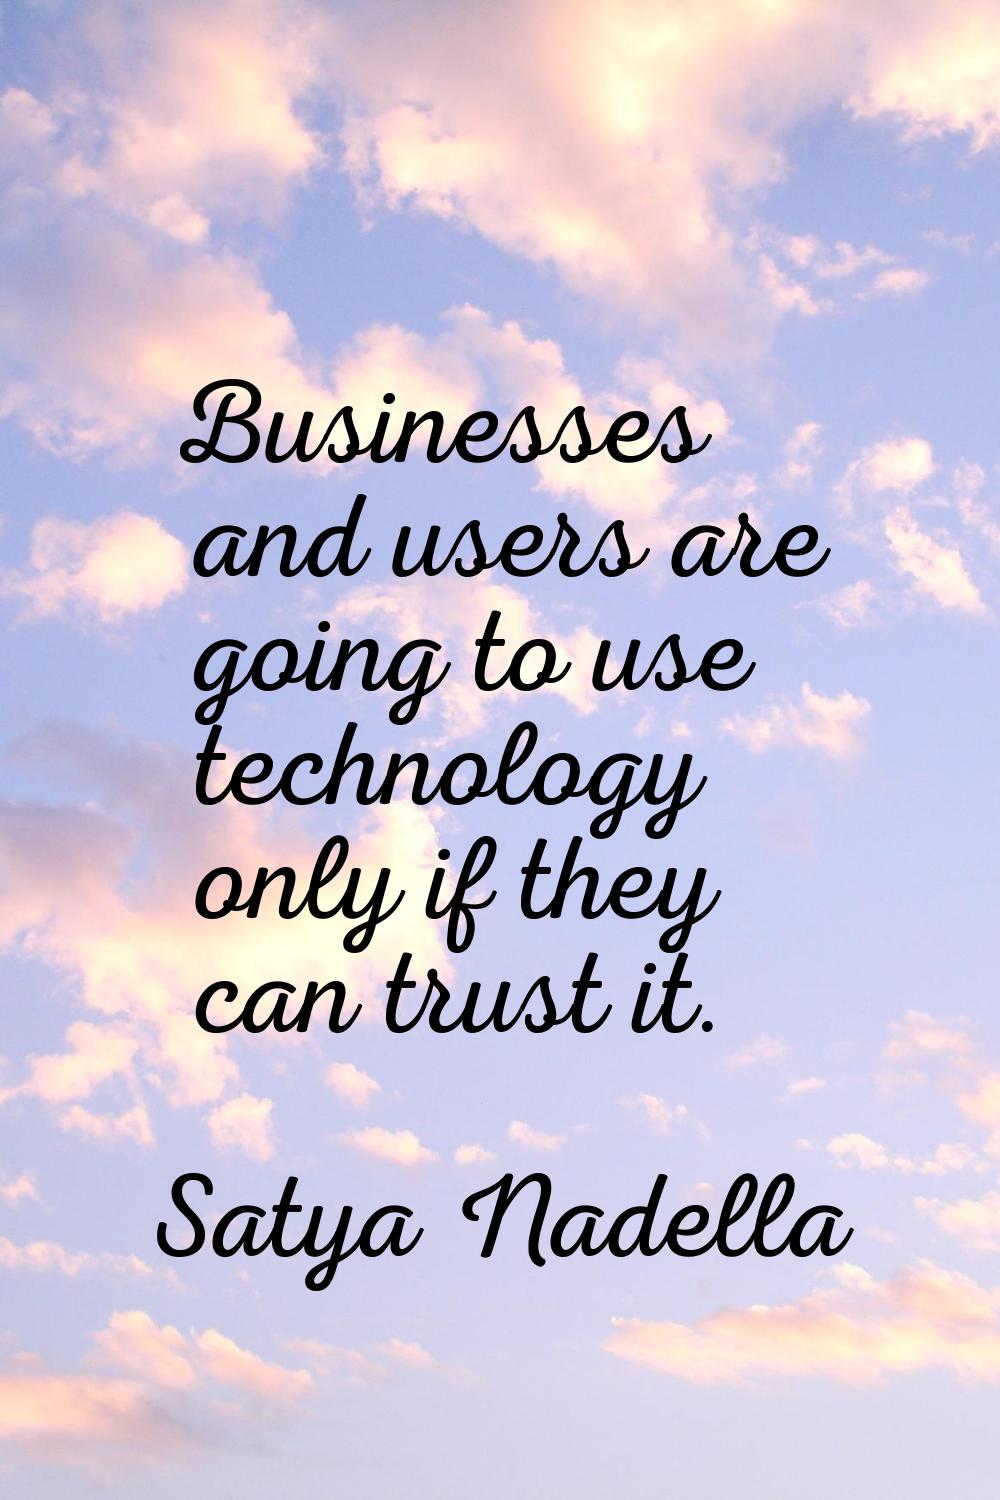 Businesses and users are going to use technology only if they can trust it.